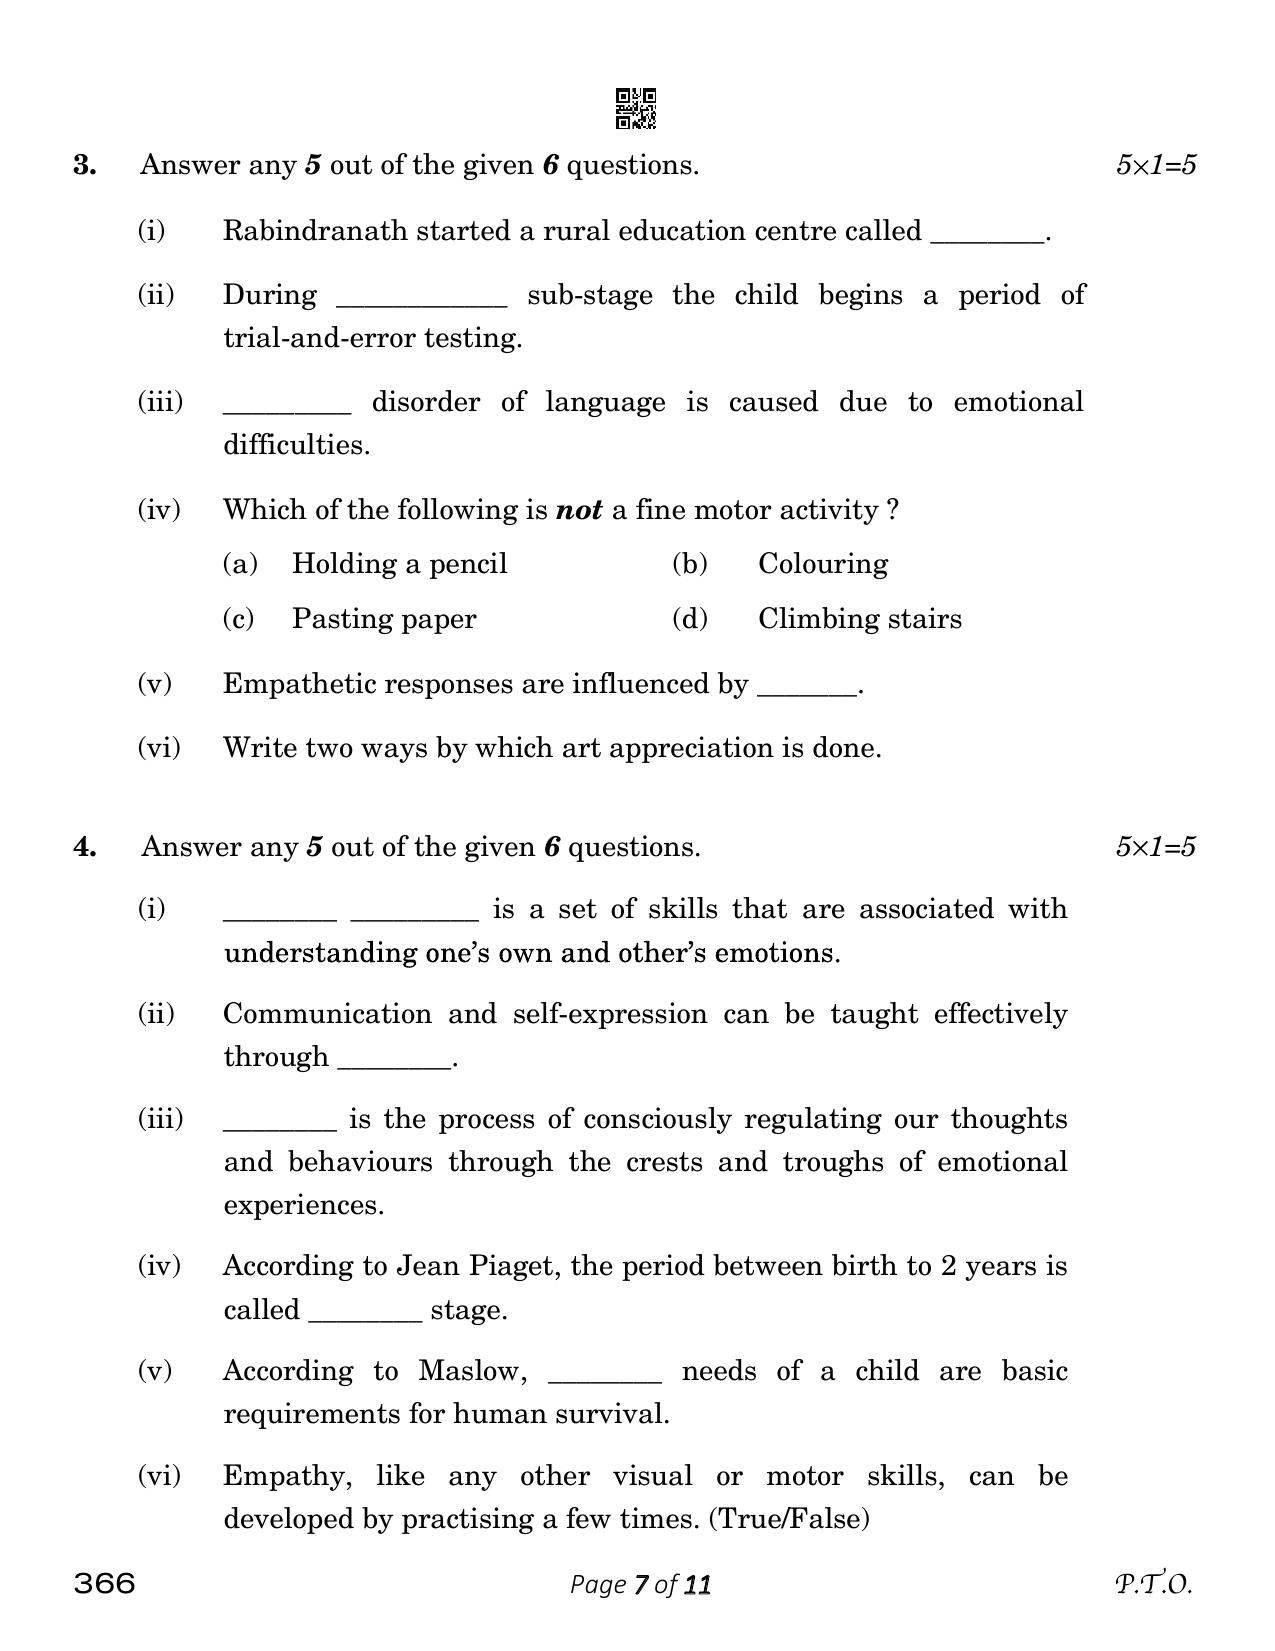 CBSE Class 12 Early Childhood Care & Education (Compartment) 2023 Question Paper - Page 7